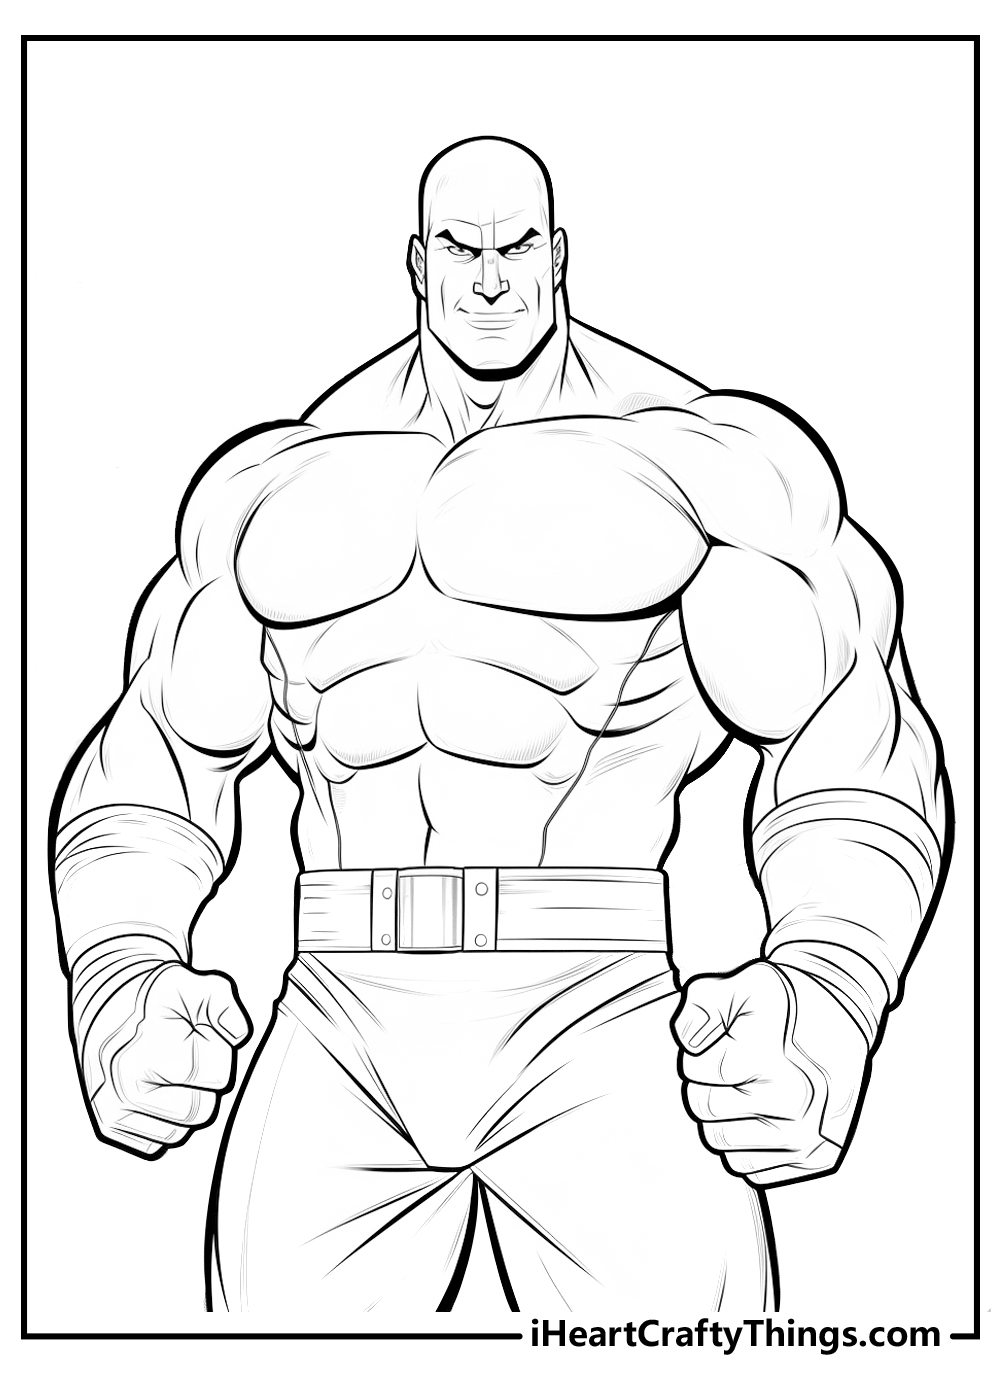 18+ Coloring Pages Wrestling